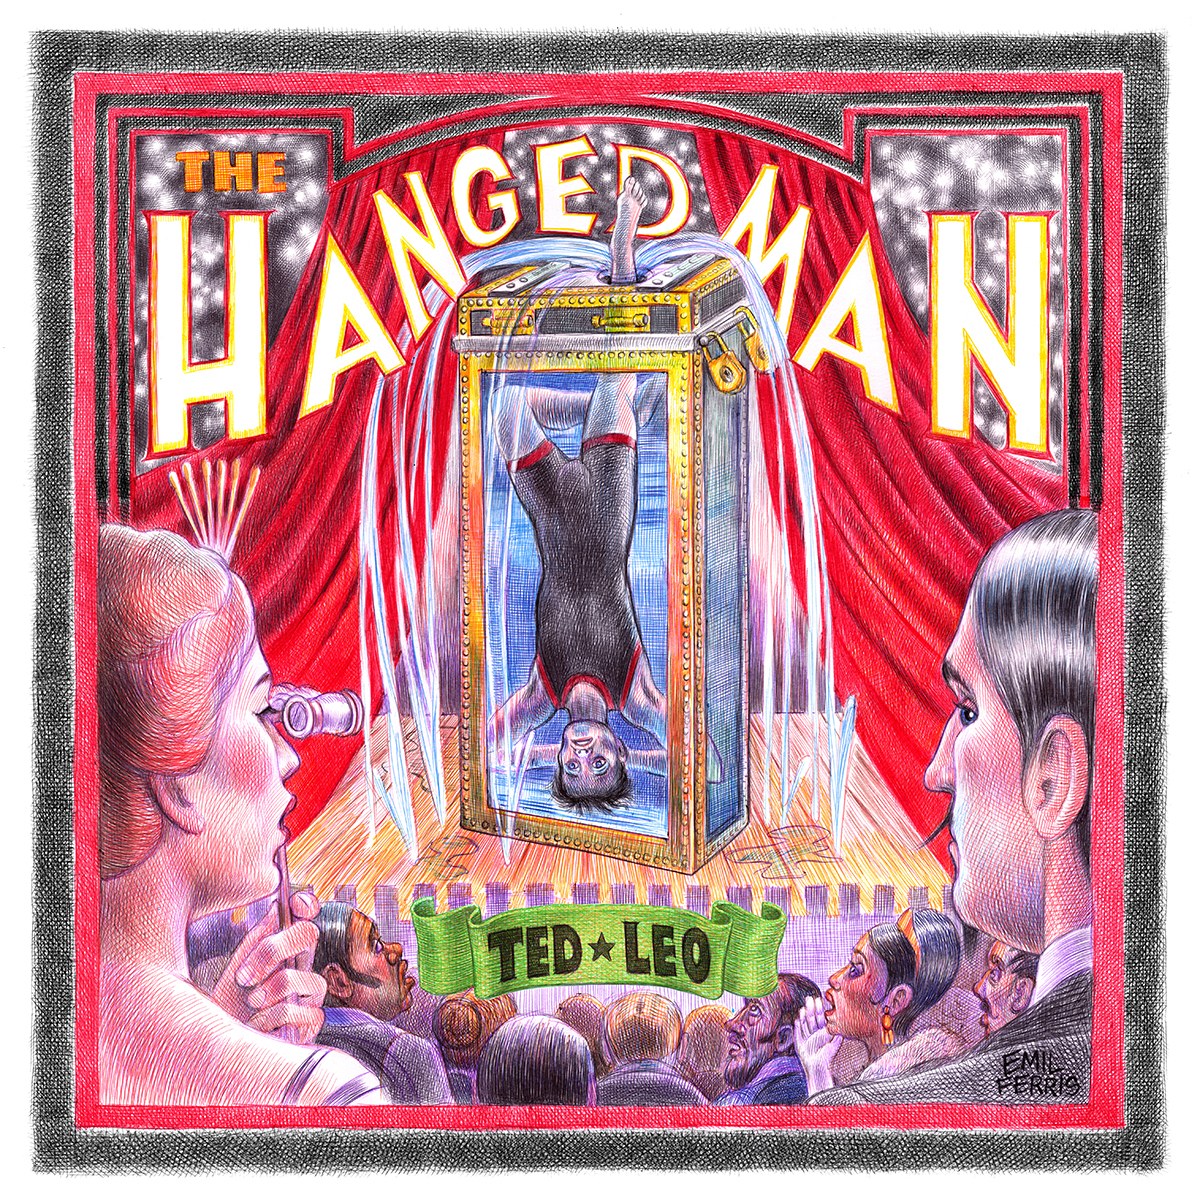 Ted Leo Details New Album <i>The Hanged Man</i>, Releases First Single “You’re Like Me”” title=”ted3d_smaller_2-1499355856″ data-original-id=”248119″ data-adjusted-id=”248119″ class=”sm_size_full_width sm_alignment_center ” data-image-source=”professional” /></p>
<p>1. Moon Out of Phase<br />
2. Used to Believe<br />
3. Can’t Go Back<br />
4. The Future<br />
5. William Weld in the 21st Century<br />
6. The Nazarene<br />
7. Run to the City<br />
8. Gray Havens<br />
9. Make Me Feel Loved<br />
10. The Little Smug Supper Club<br />
11. Anthems of None<br />
12. You’re Like Me<br />
13. Lonsdale Avenue<br />
14. Let’s Stay on the Moon</p>
</p><p>To see our running list of the top 100 greatest rock stars of all time, <a href=